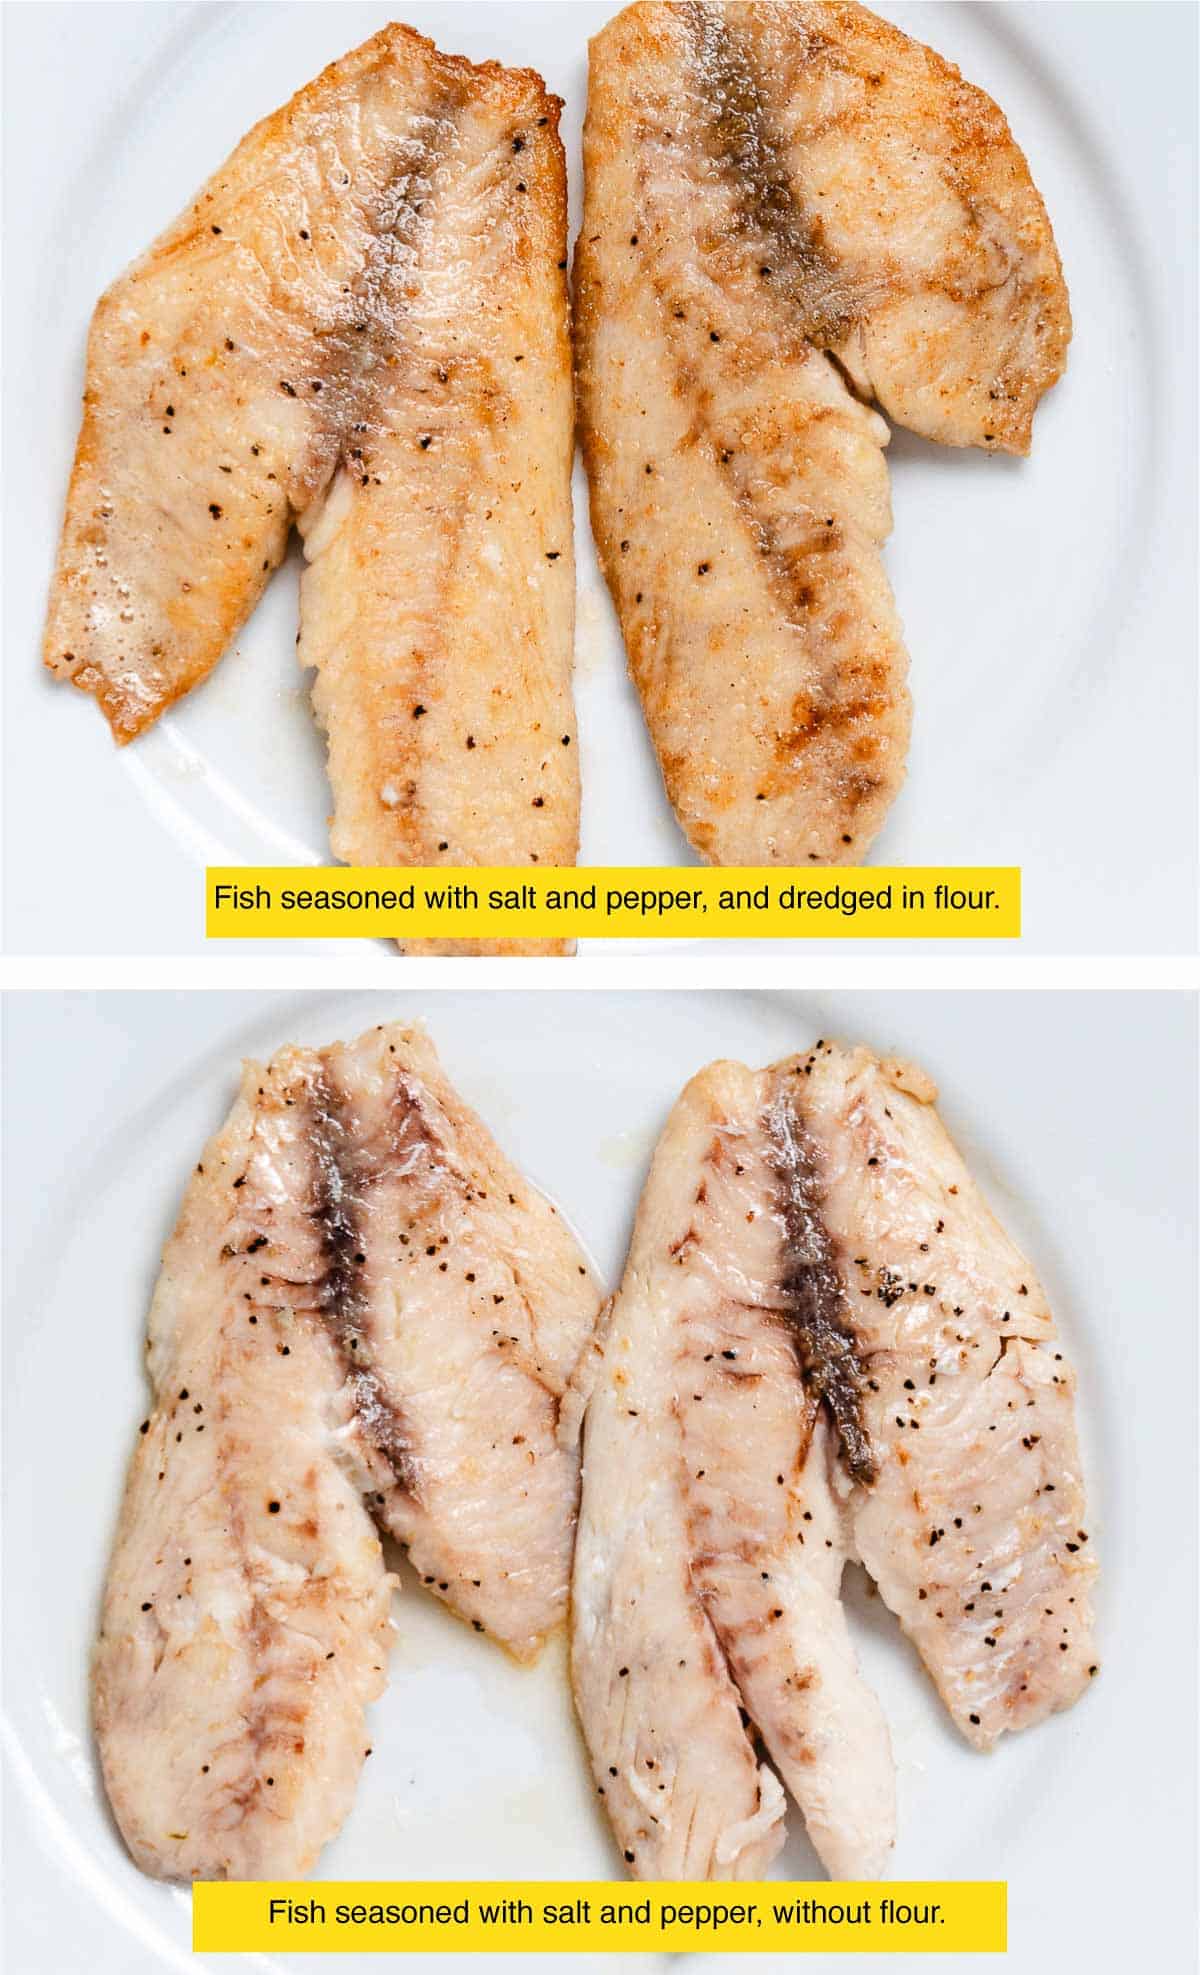 Comparison if fish thats floured before cooking and fish with no flour.